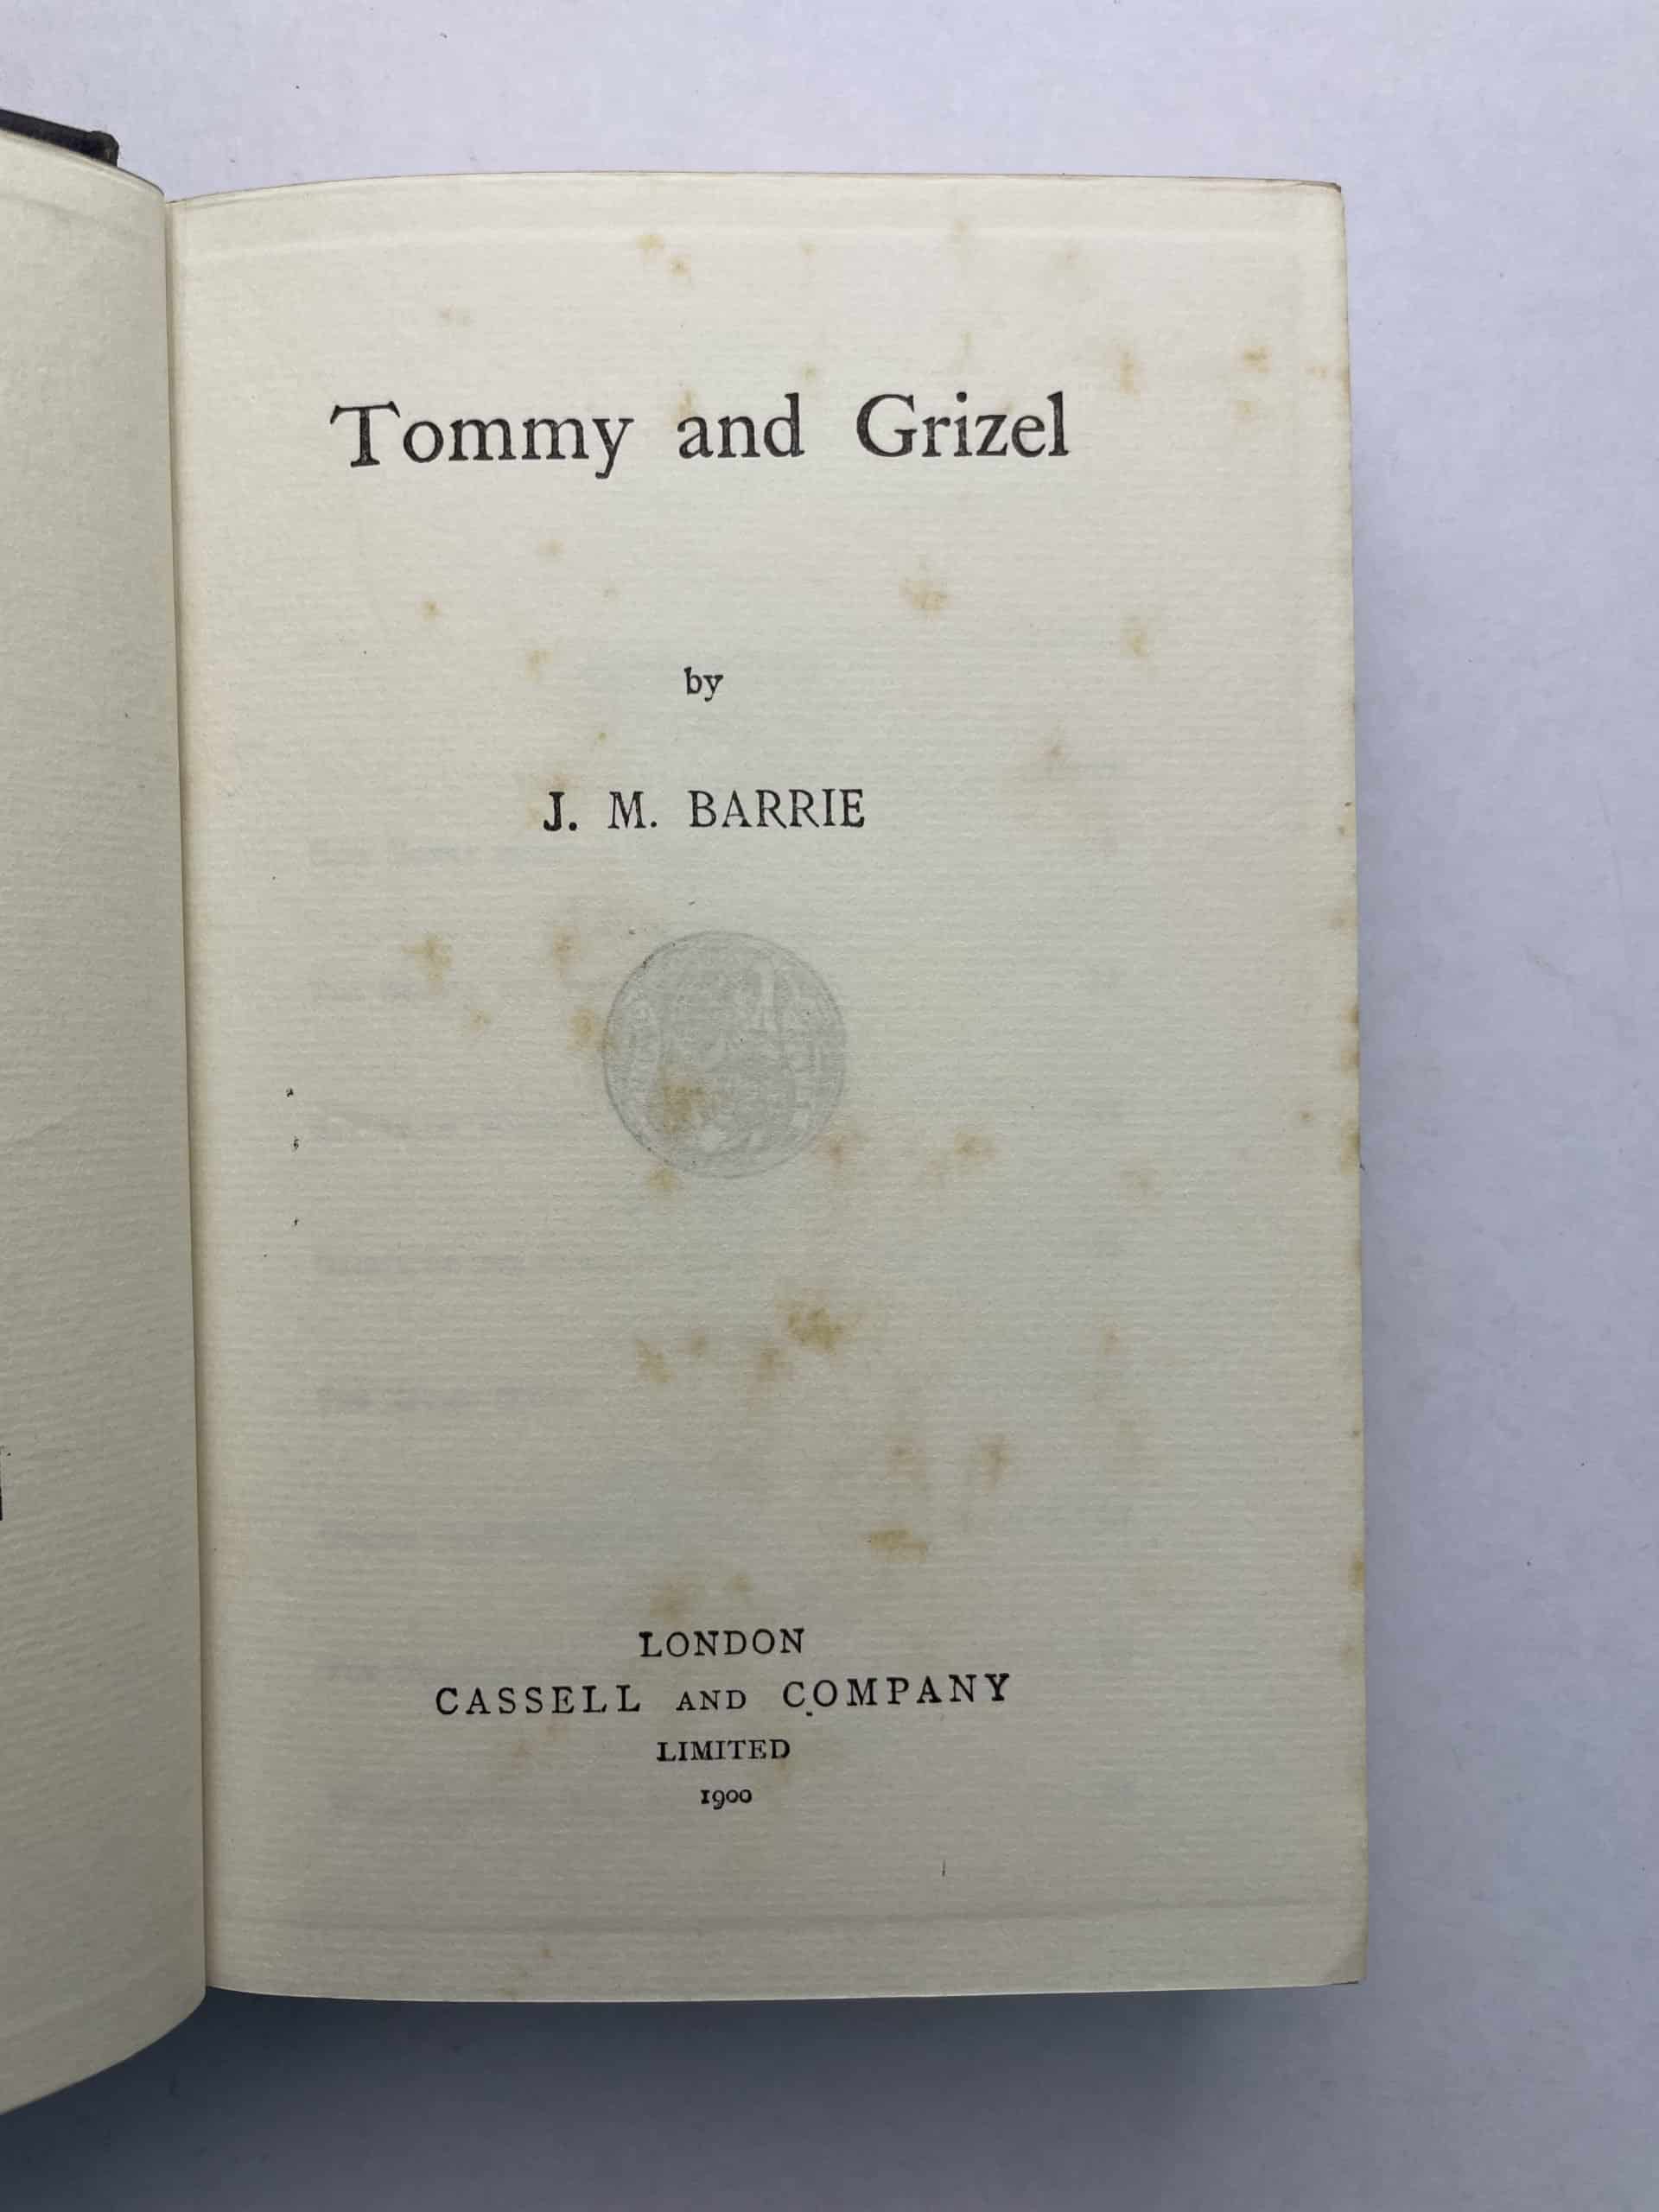 jm barrie double tommy 3